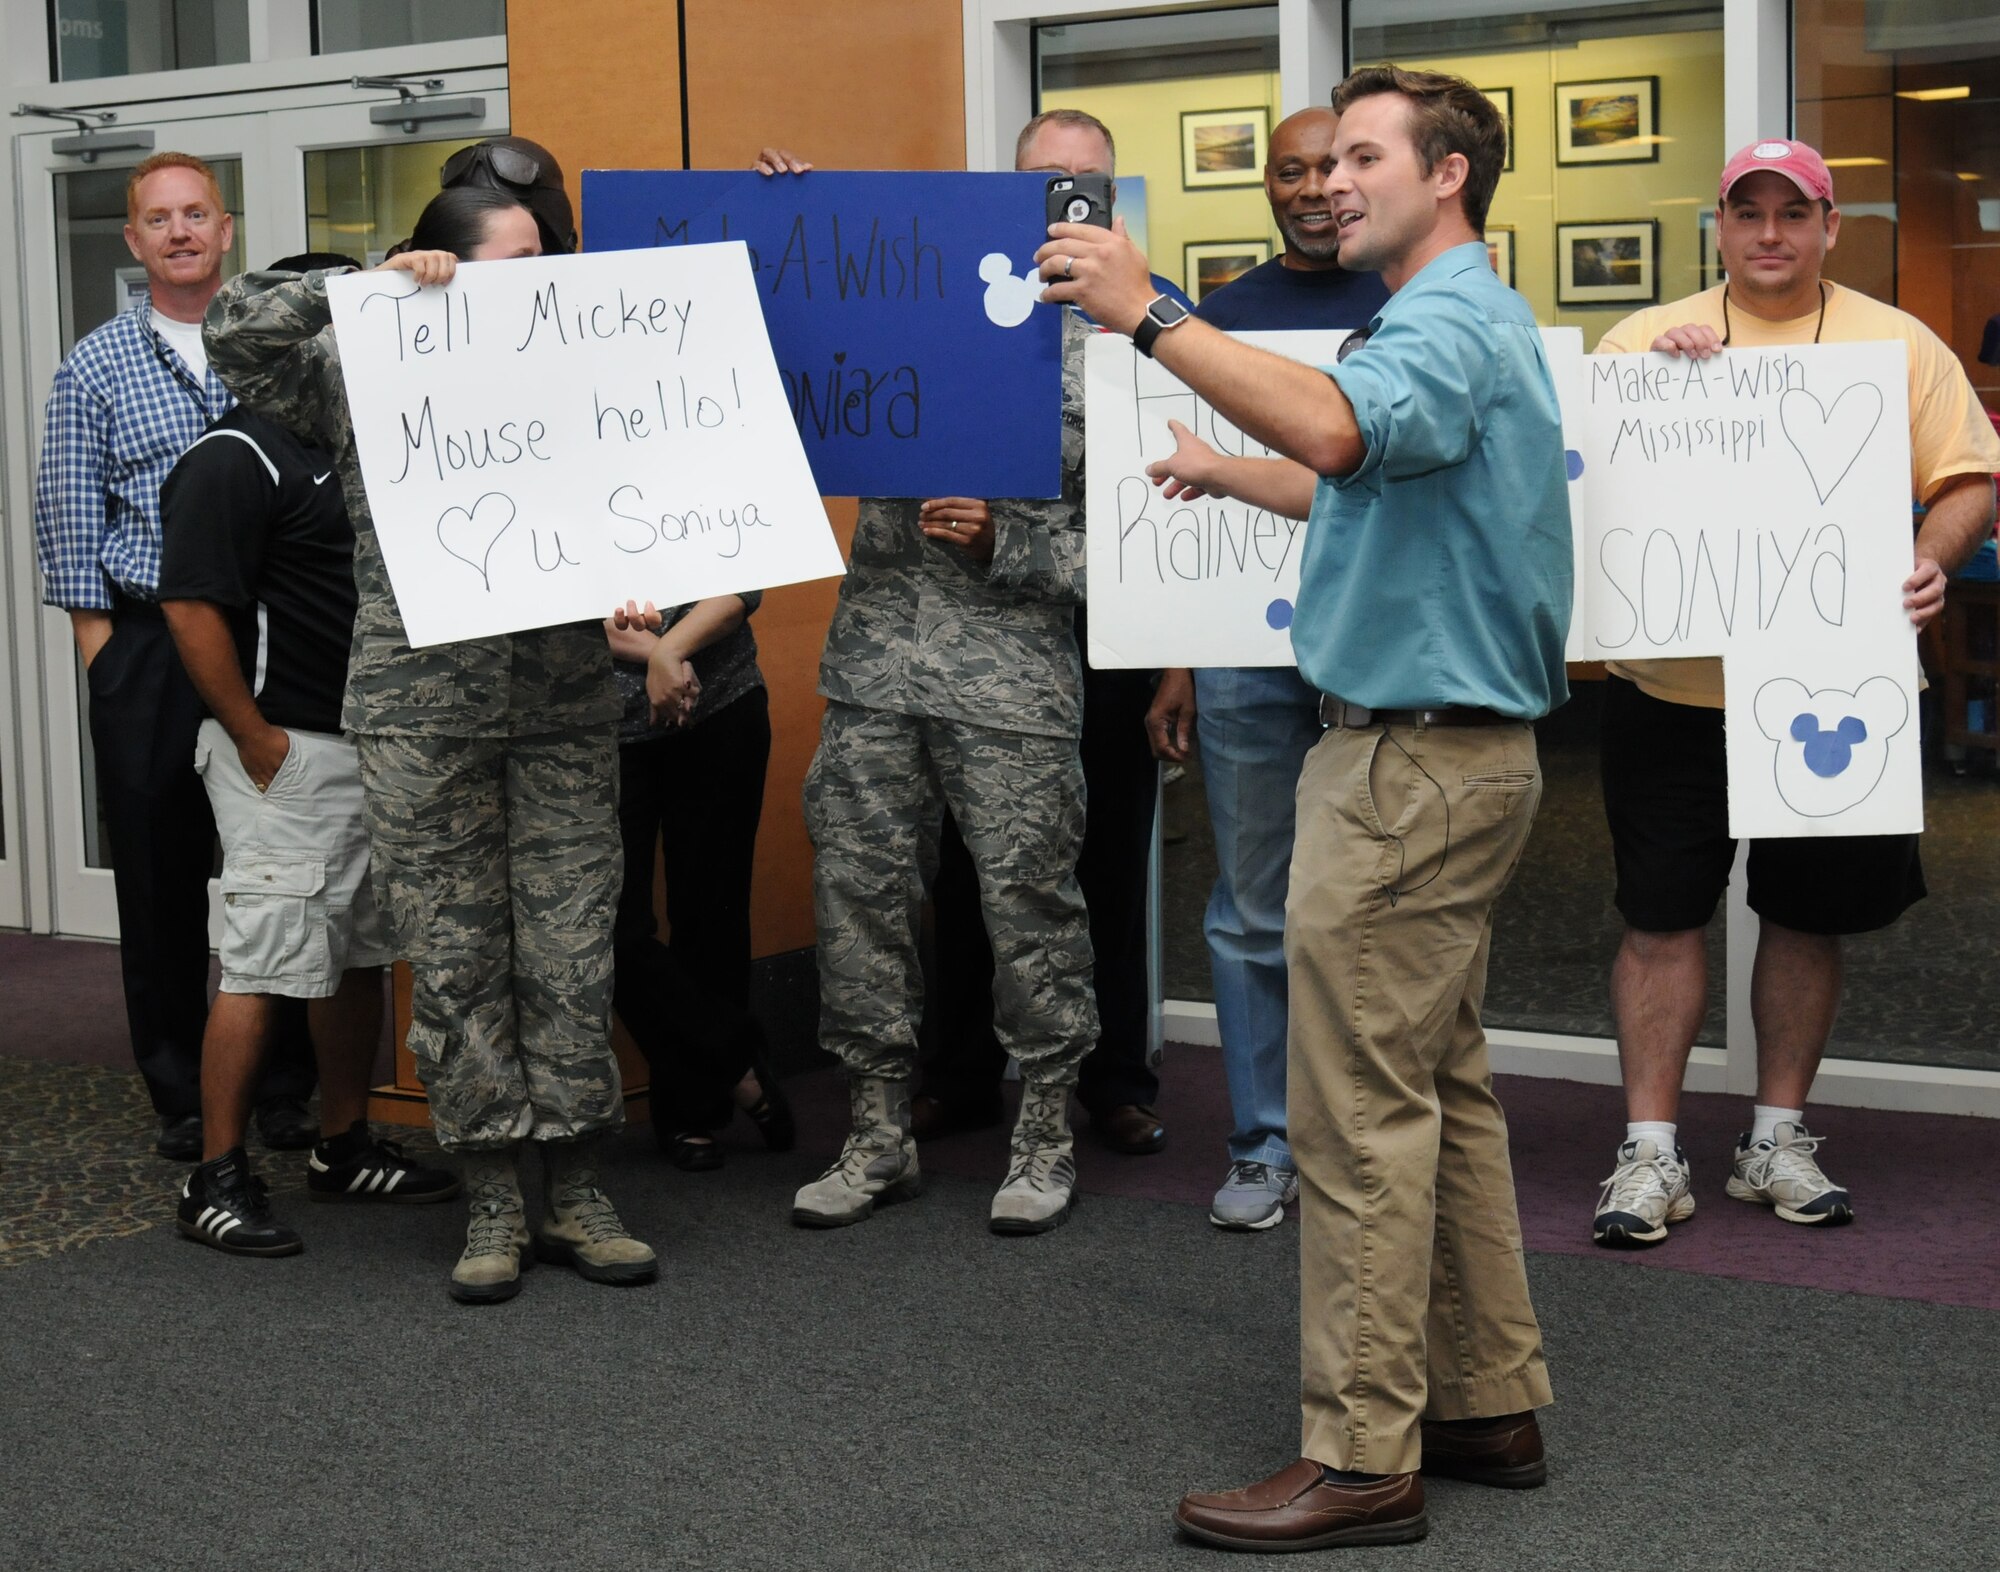 Jonathan Brannan, WLOX reporter, captures a live video stream of the 81st Force Support Squadron and the local community members showing their support for Staff Sgt. Devanie Rainey, 81st FSS customer support supervisor, and her family, upon their arrival at the Gulfport-Biloxi International Airport Oct. 14, 2016, Gulfport, Miss. The Make-A-Wish Foundation flew the Rainey family to Disney World after their daughter, Saniya, was diagnosed with germ cell tumors. (U.S. Air Force photo by Kemberly Groue/Released)